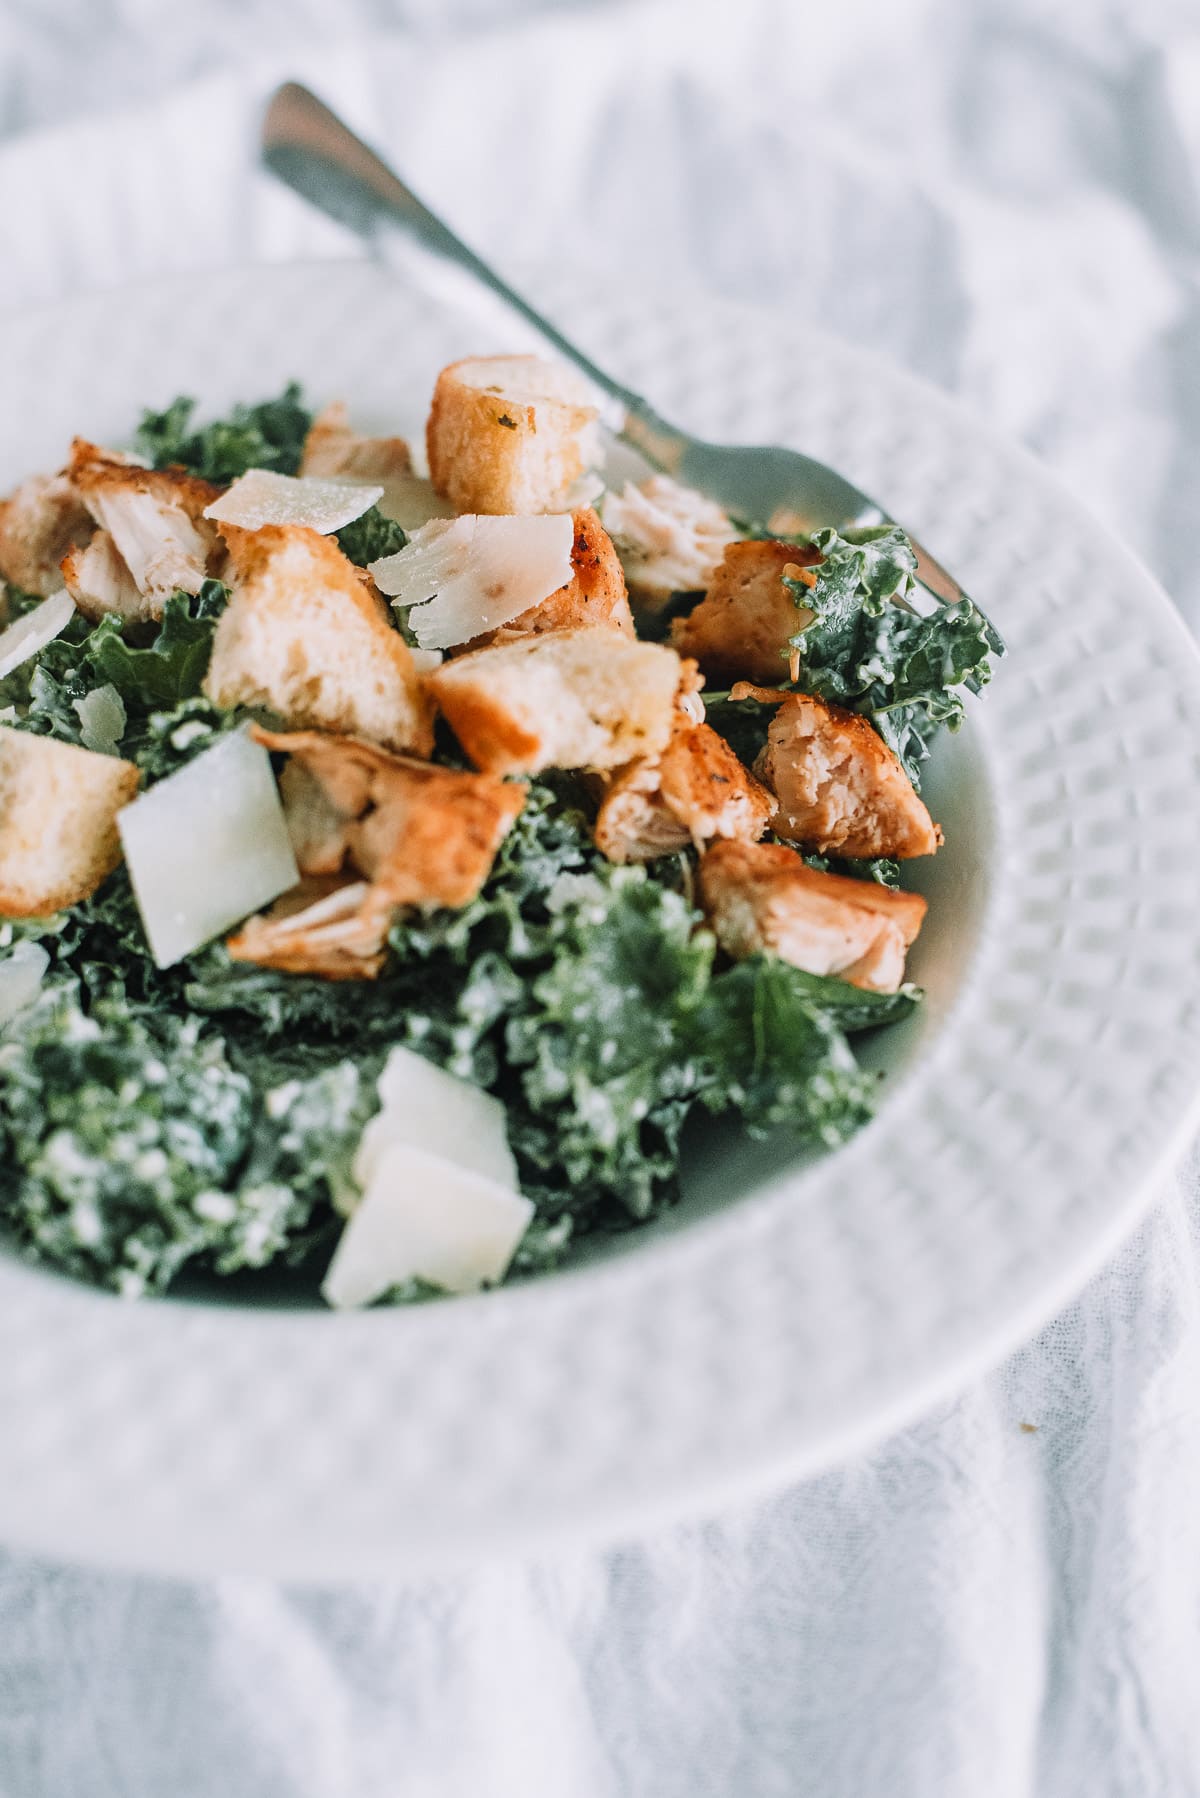 Kale Caesar Salad with Chicken with croutons in a white bowl with silver fork